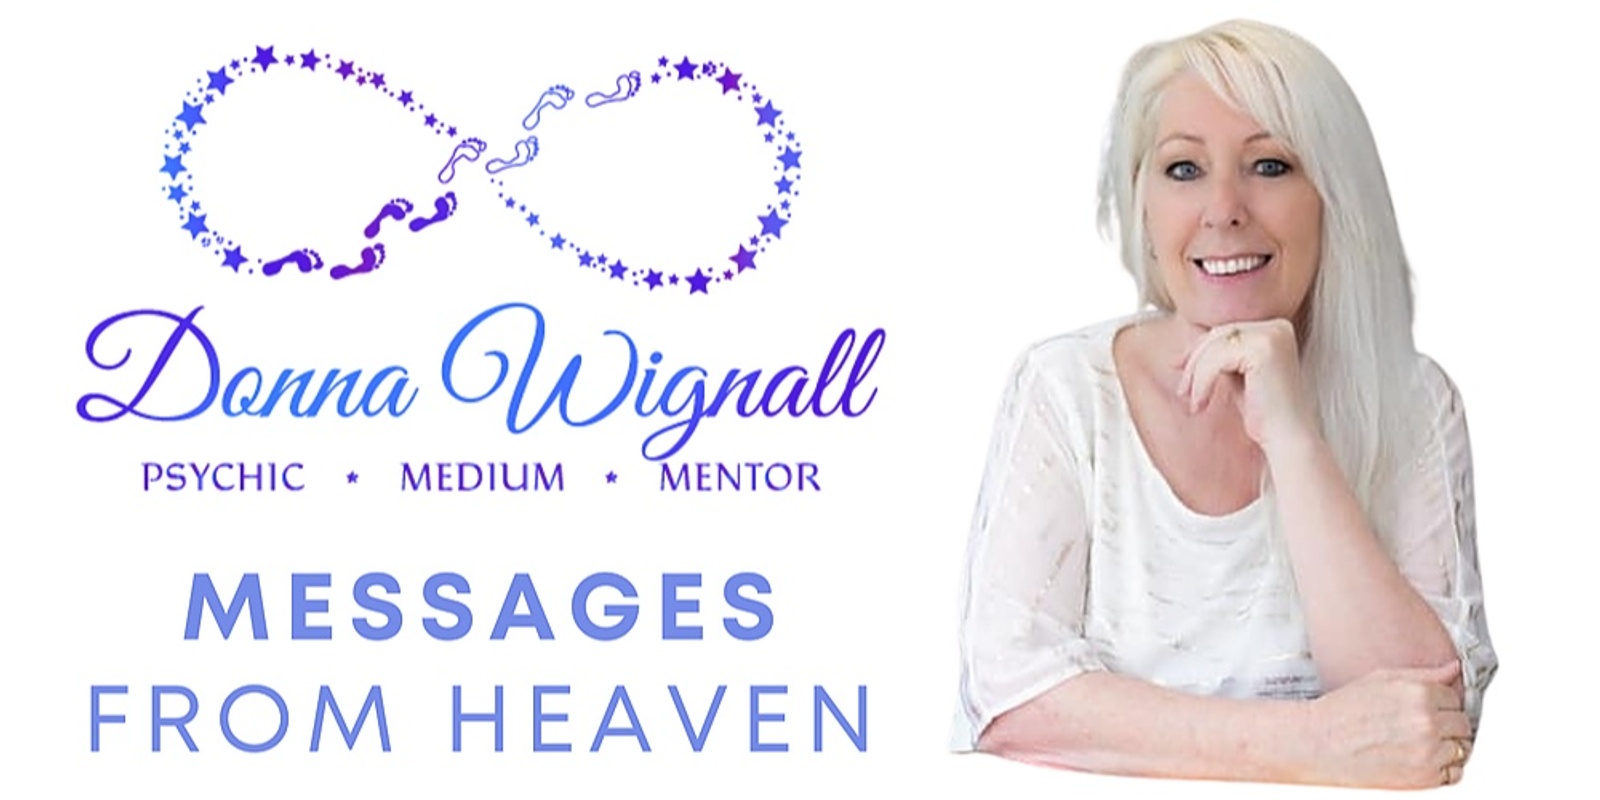 Banner image for Messages from Heaven presented by Donna Wignall - Caversham